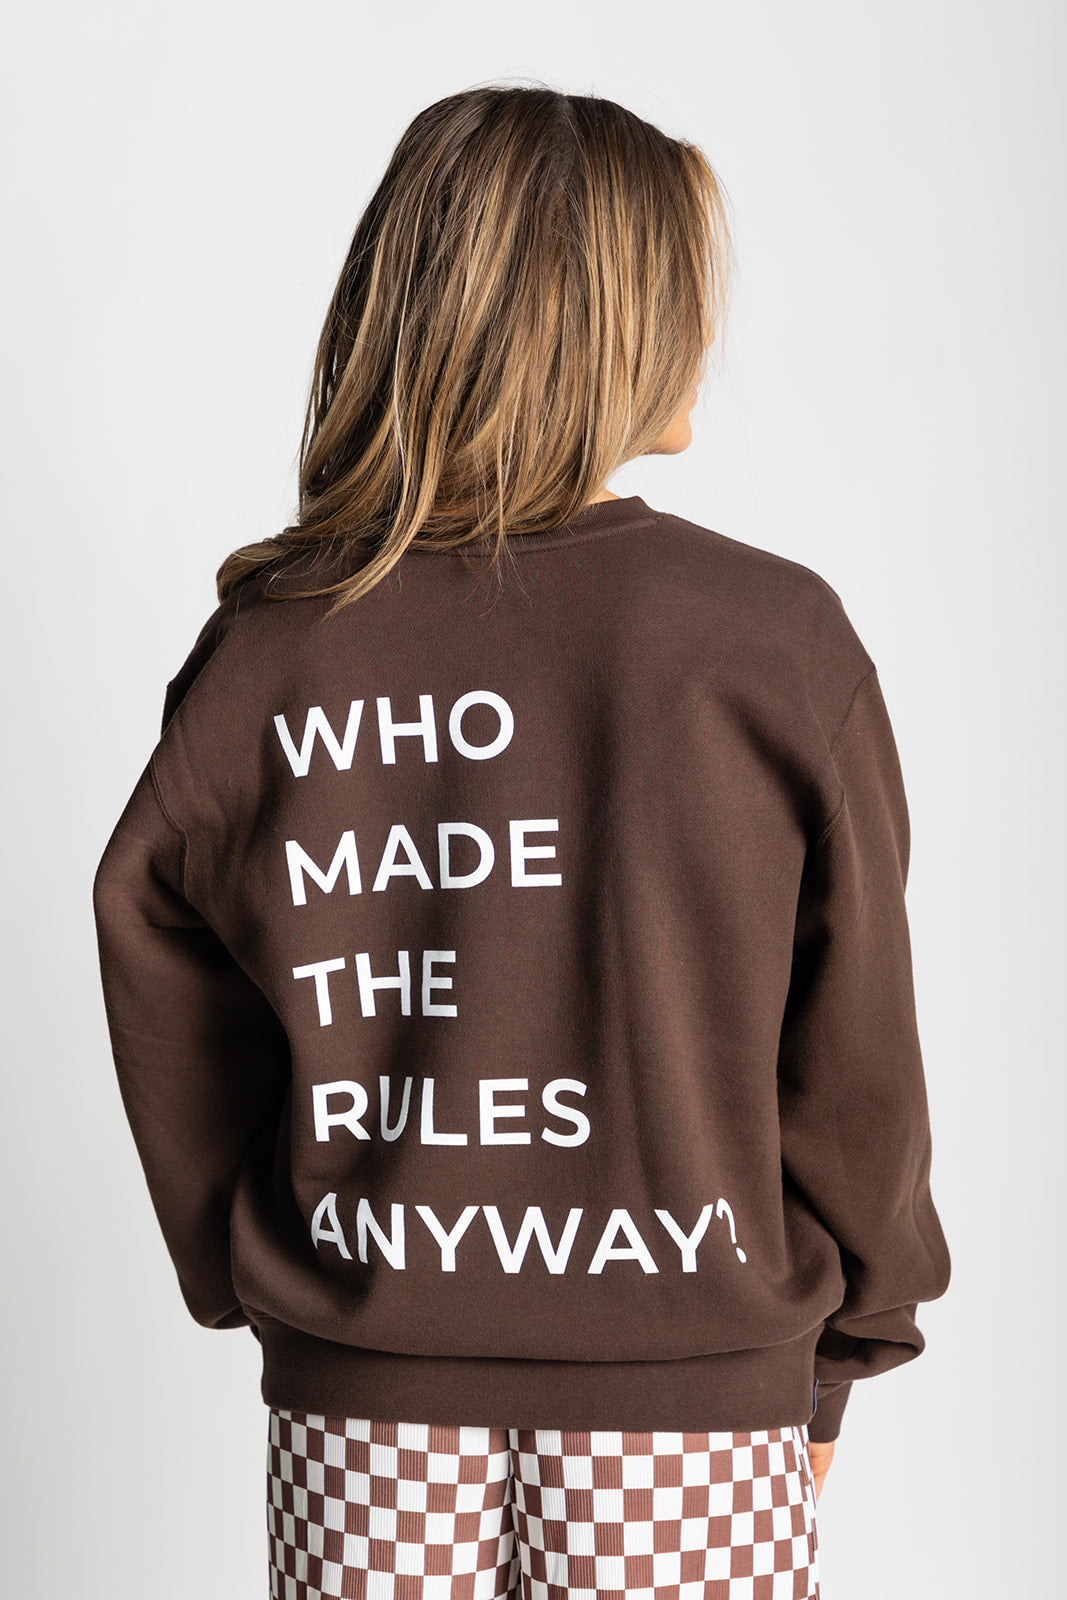 Bend the Rules Crewneck [S-3X